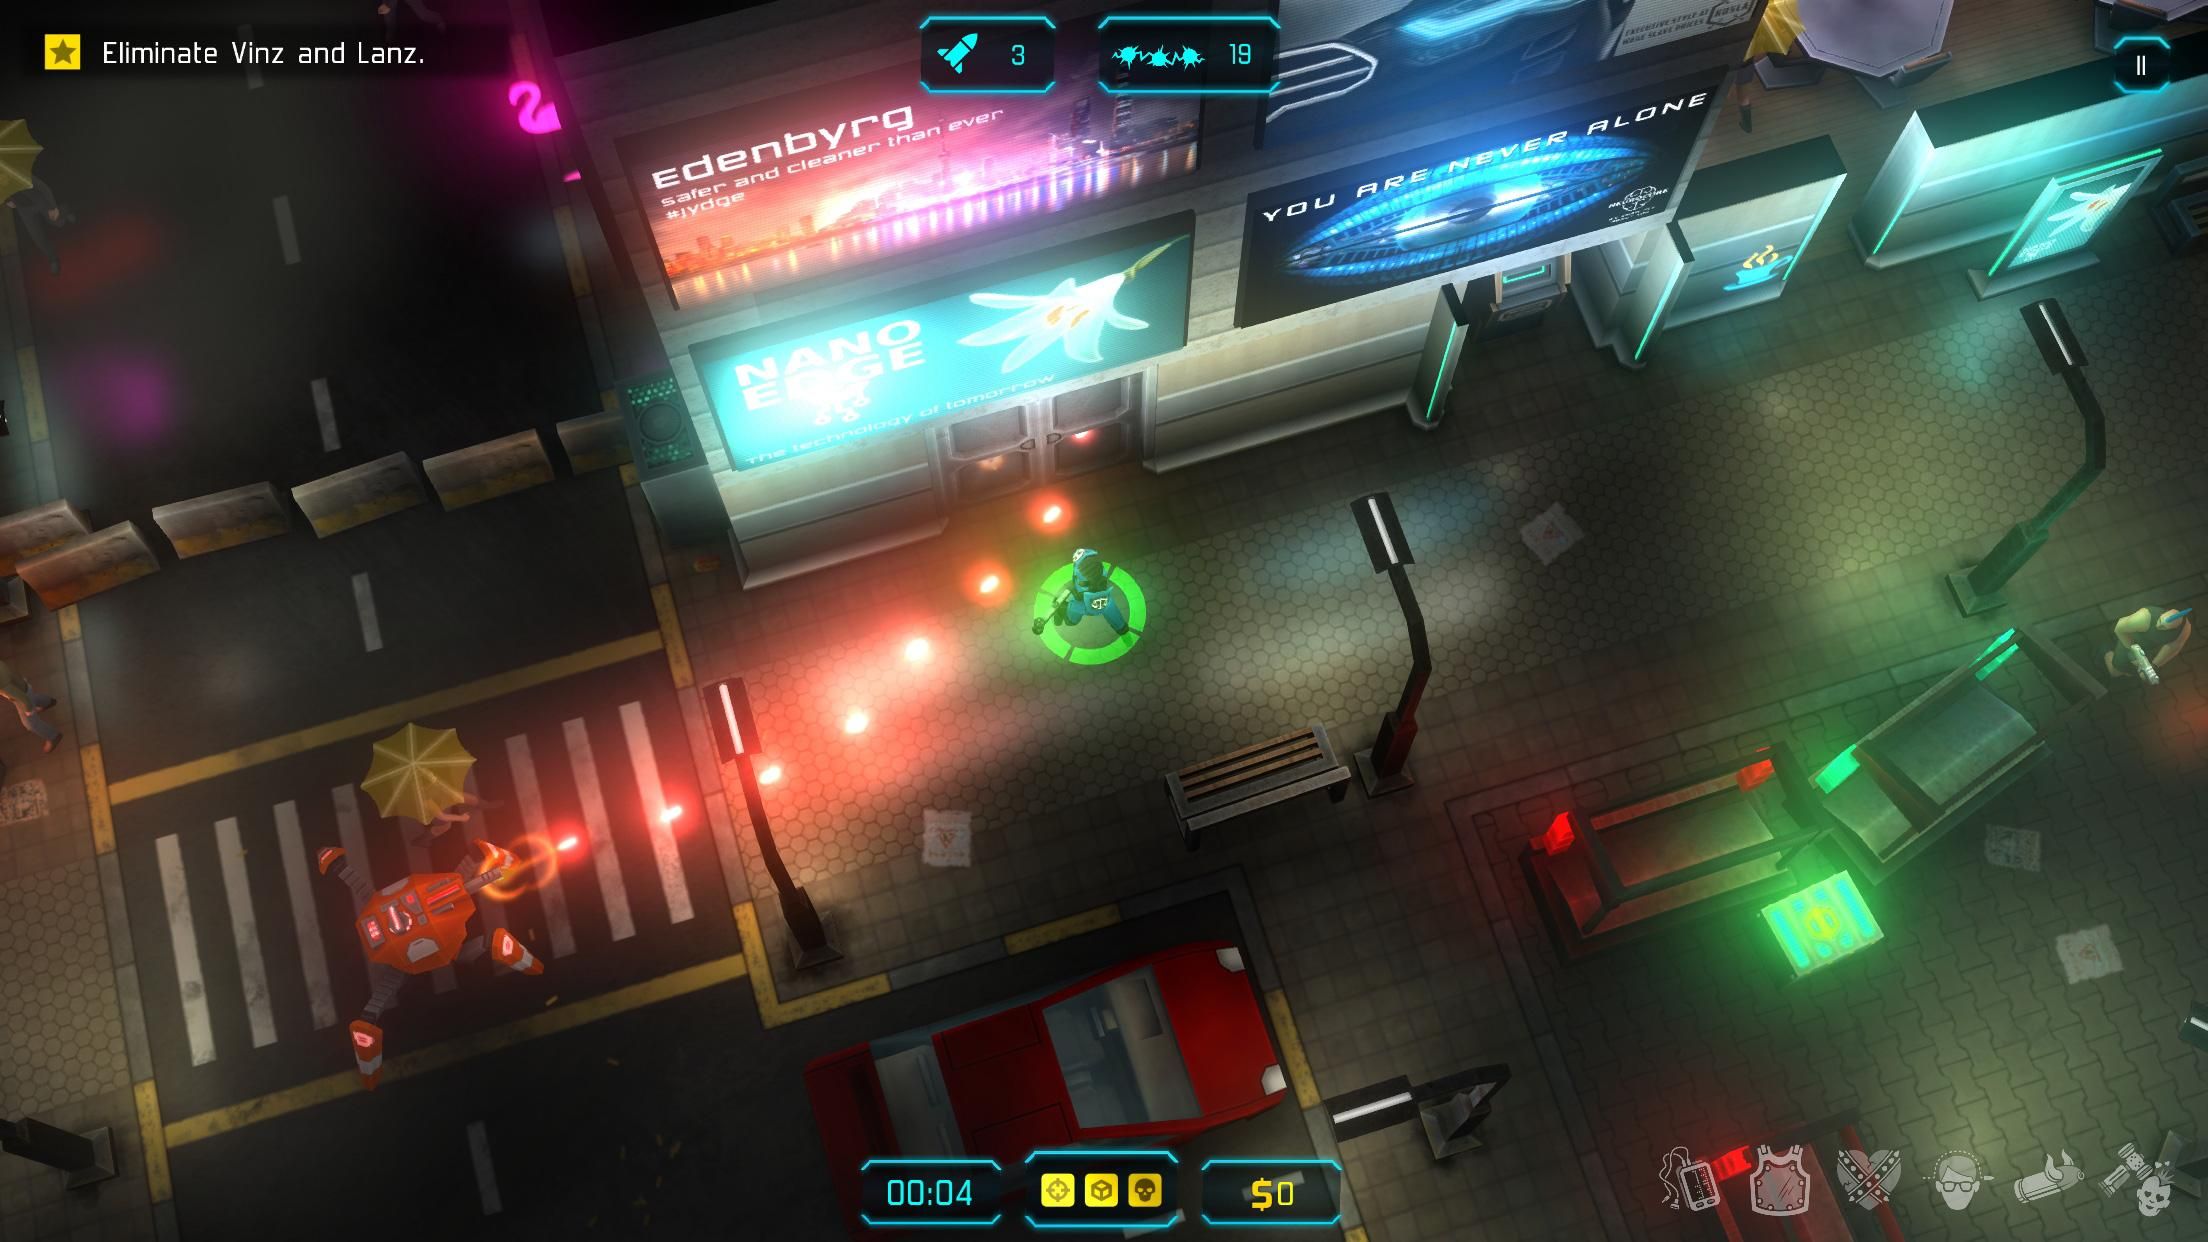 best-cyberpunk-games-android-jydge-eliminate-vinz-and-lanz